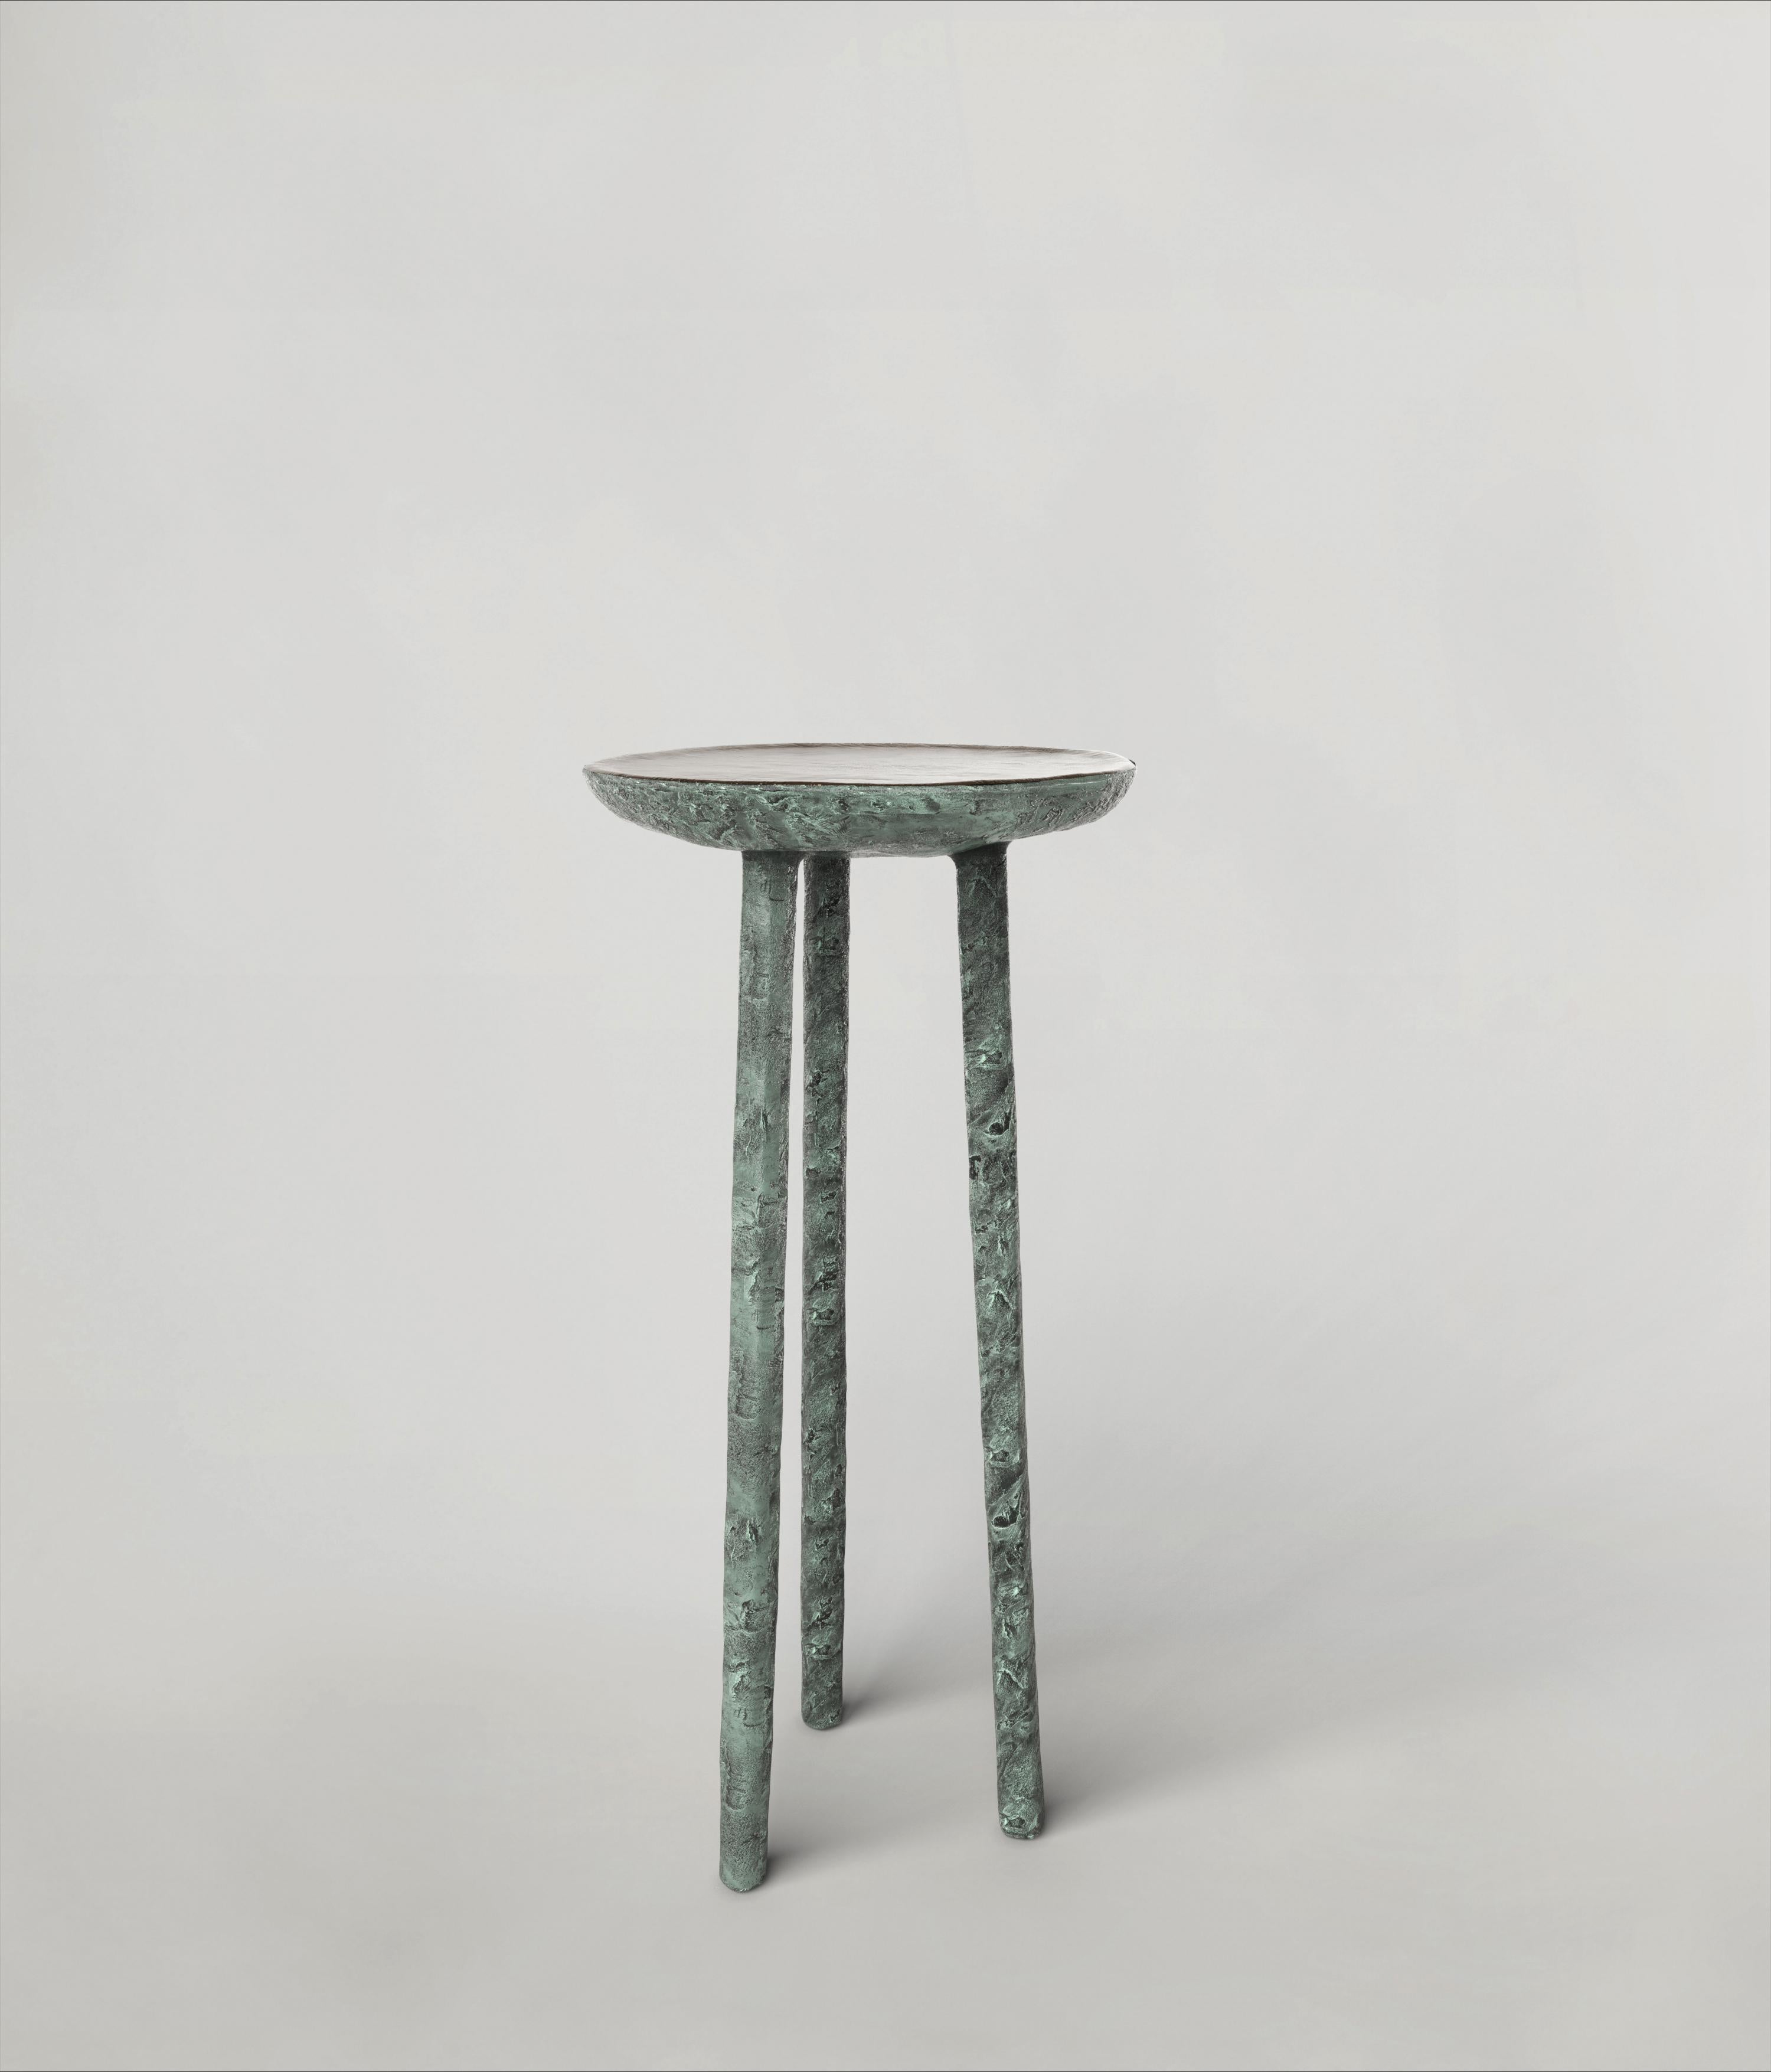 Comma V3 High Stool by Edizione Limitata
Limited Edition of 150 pieces. Signed and numbered.
Dimensions: D90 x W40 x H130 cm
Materials: Green Patina Bronze

Comma is a 21st Century collection of seatings made by Italian artisans in bronze with a